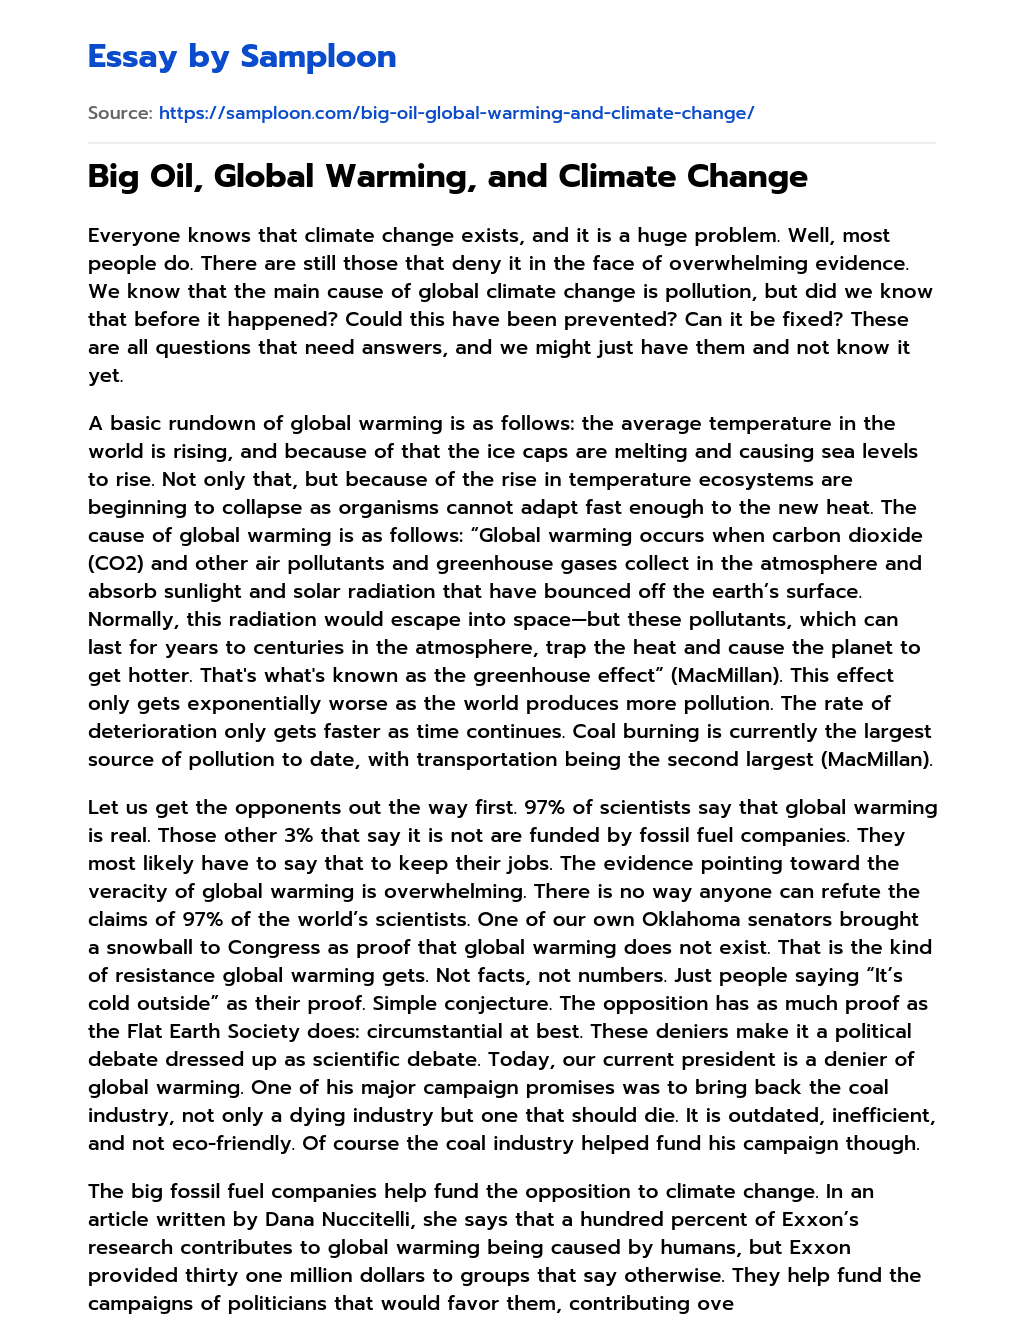 Big Oil, Global Warming, and Climate Change essay